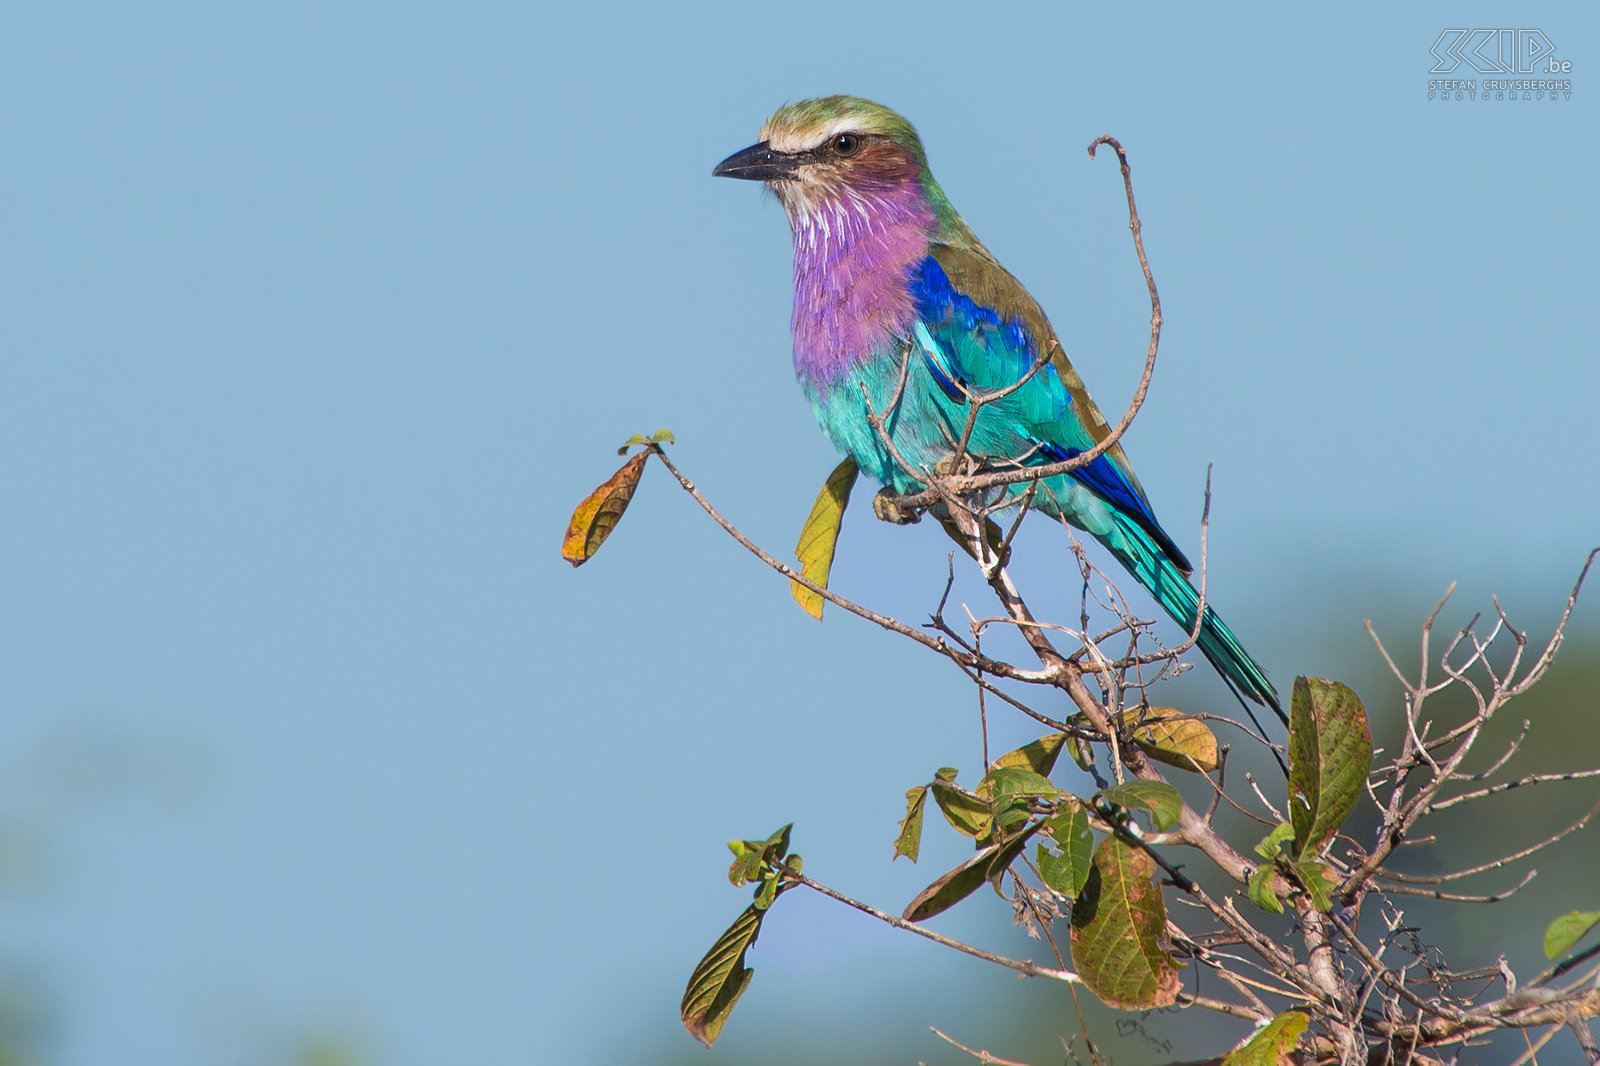 South Luangwa - Lilac-breasted roller The lilac-breasted roller (Coracias caudatus) is a common but beautiful bird that can be mostly seen at the tops of trees from where it can spot insects, lizards, snails, small birds and rodents at the ground. Stefan Cruysberghs